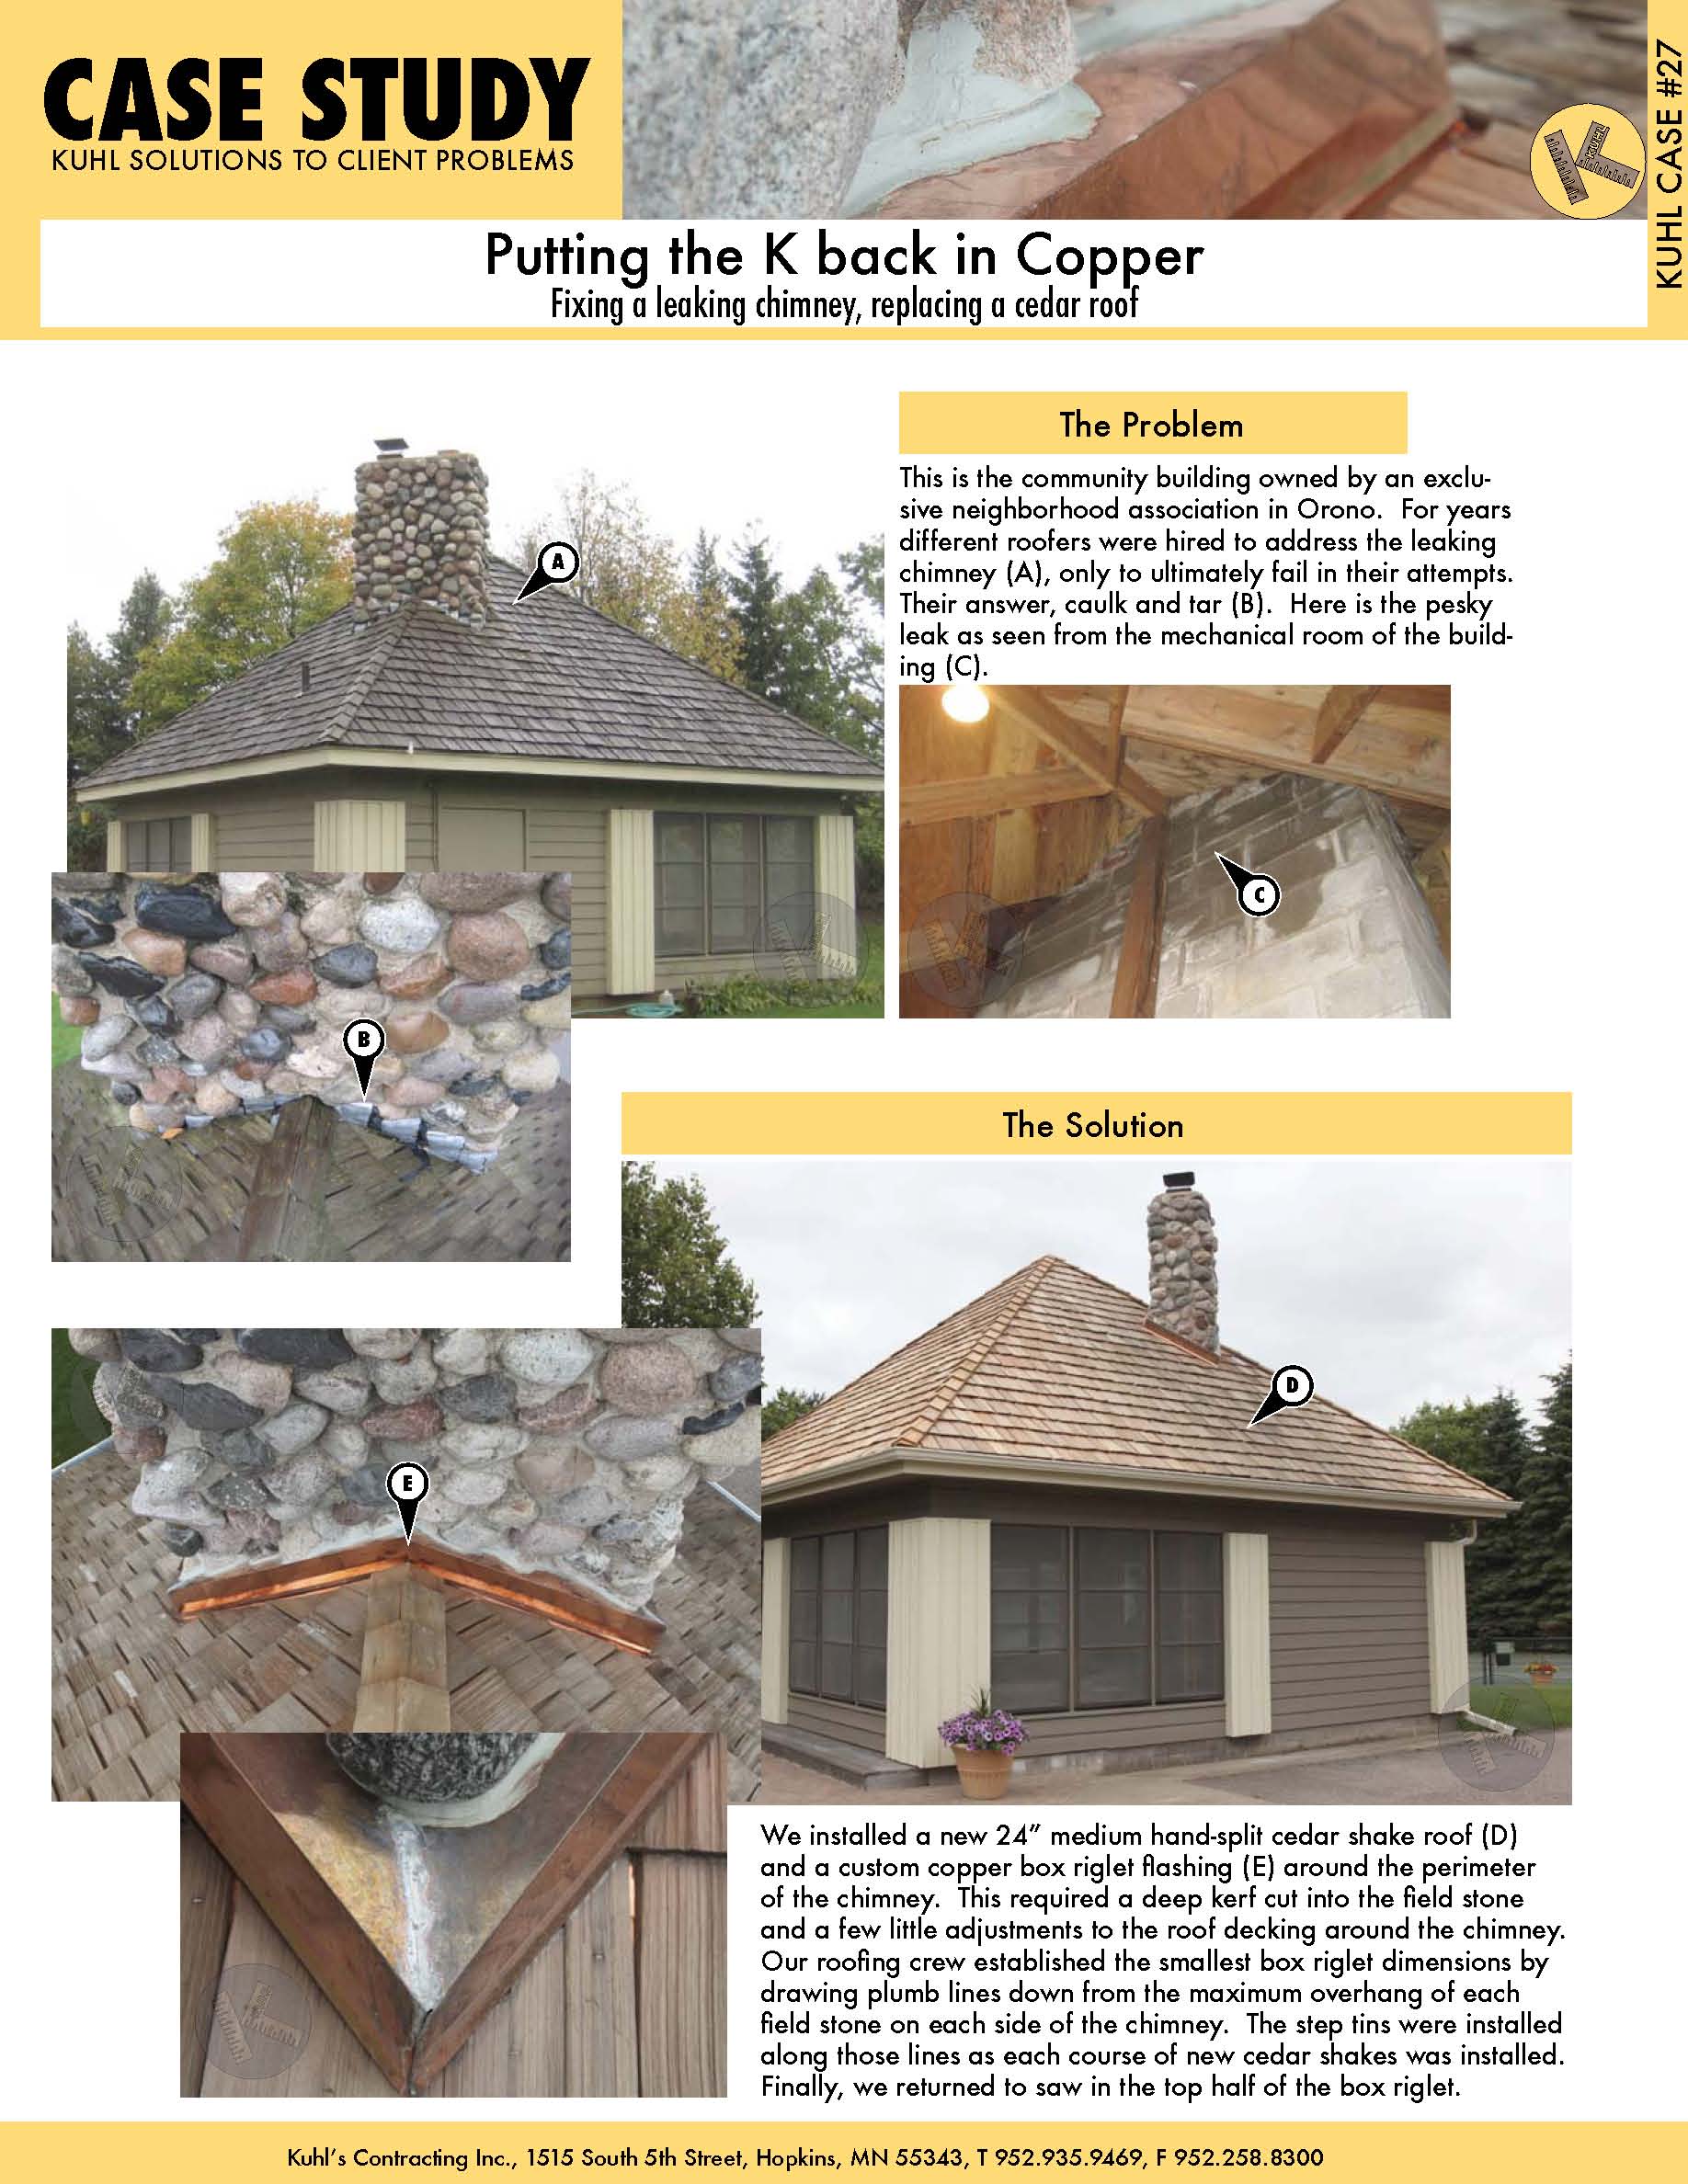 Putting the K Back in Copper: How to Fix a Leaking Stone Chimney